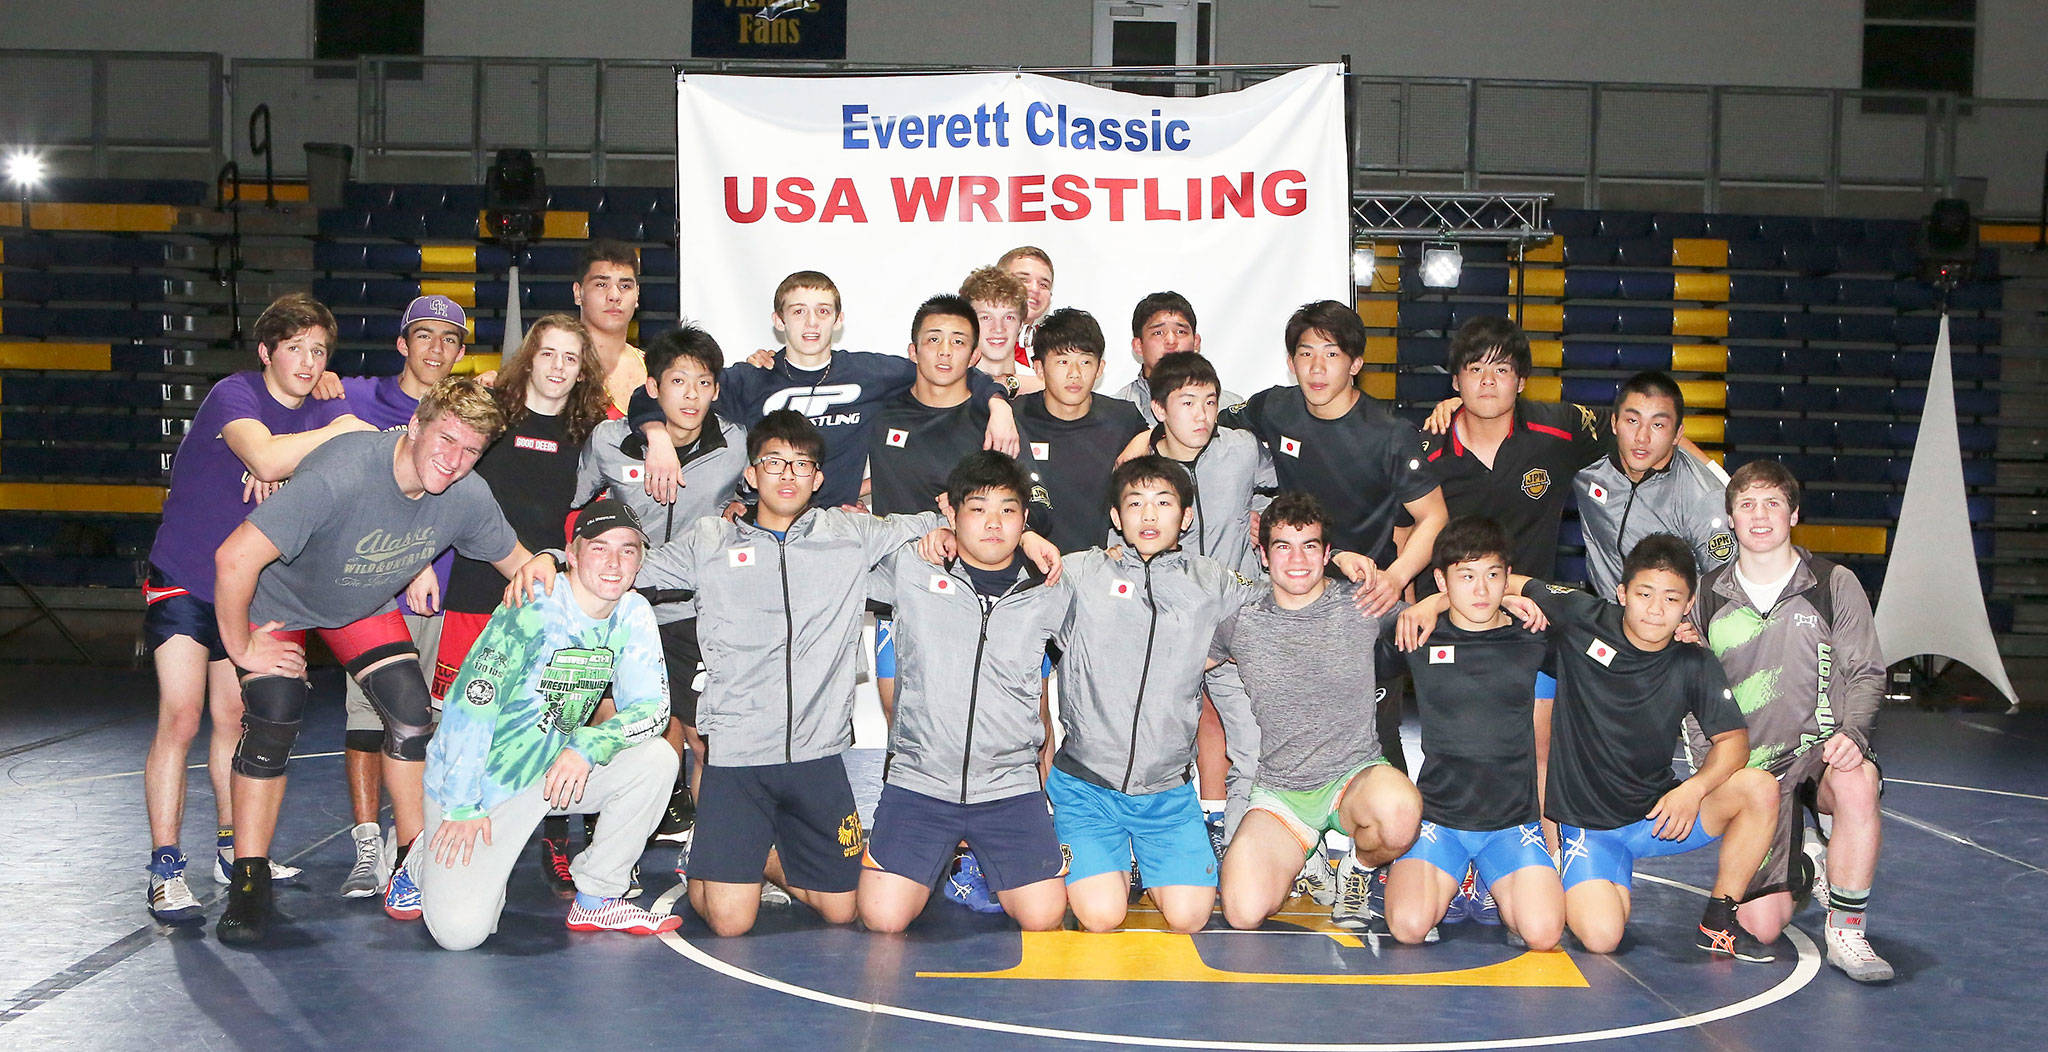 Three Oak Harbor wrestlers and the regional all-stars pose with the members of the Japanese Natonal Junior team after their meet Friday in Everett. The Wildcats are at the far left, Blake McBride, Caleb Fitzgerald and Michael Fisken. (Photo by John Fisken)